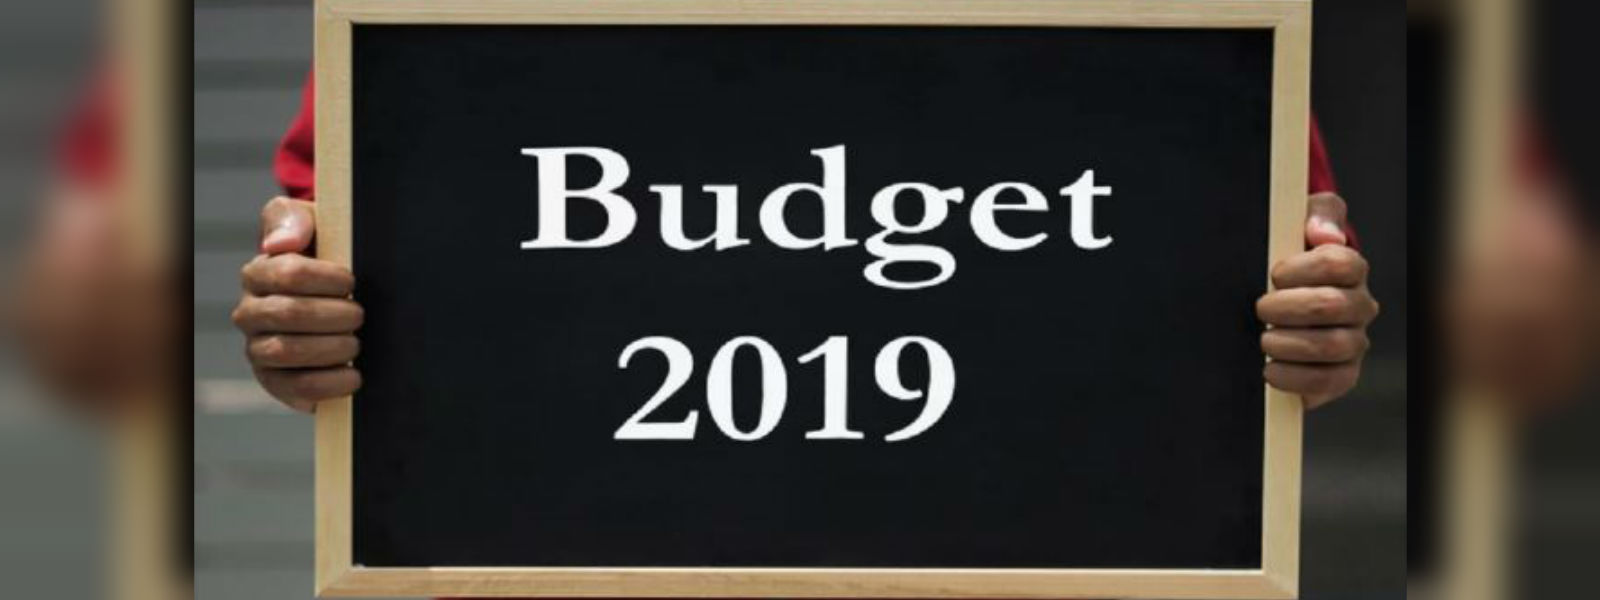 Comments on 2019 Budget proposals by IPS